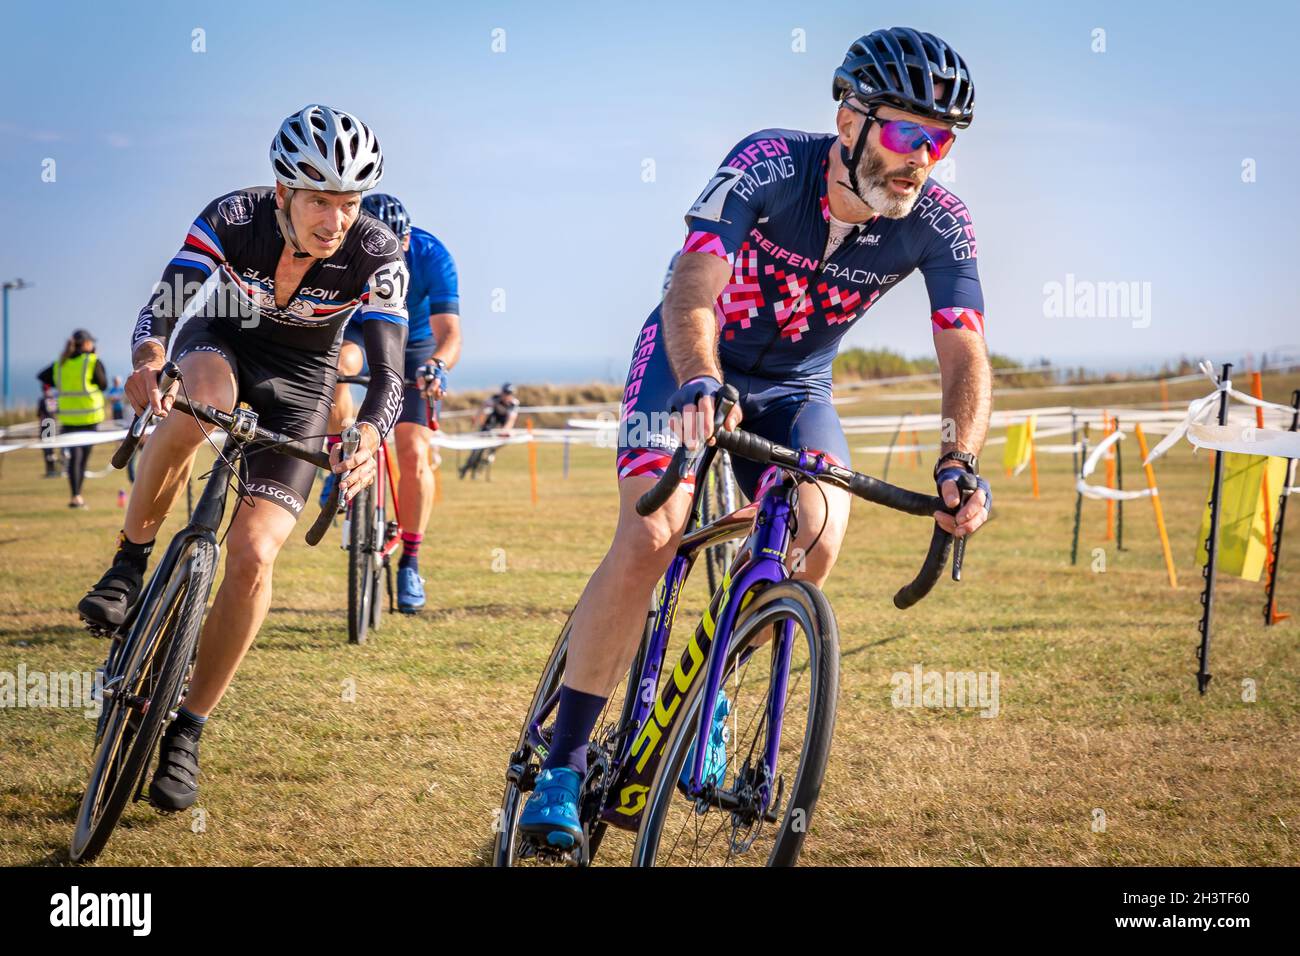 Cyclocross race event, South Shields, Tyne and Wear, England, UK, GB, Europe. Stock Photo